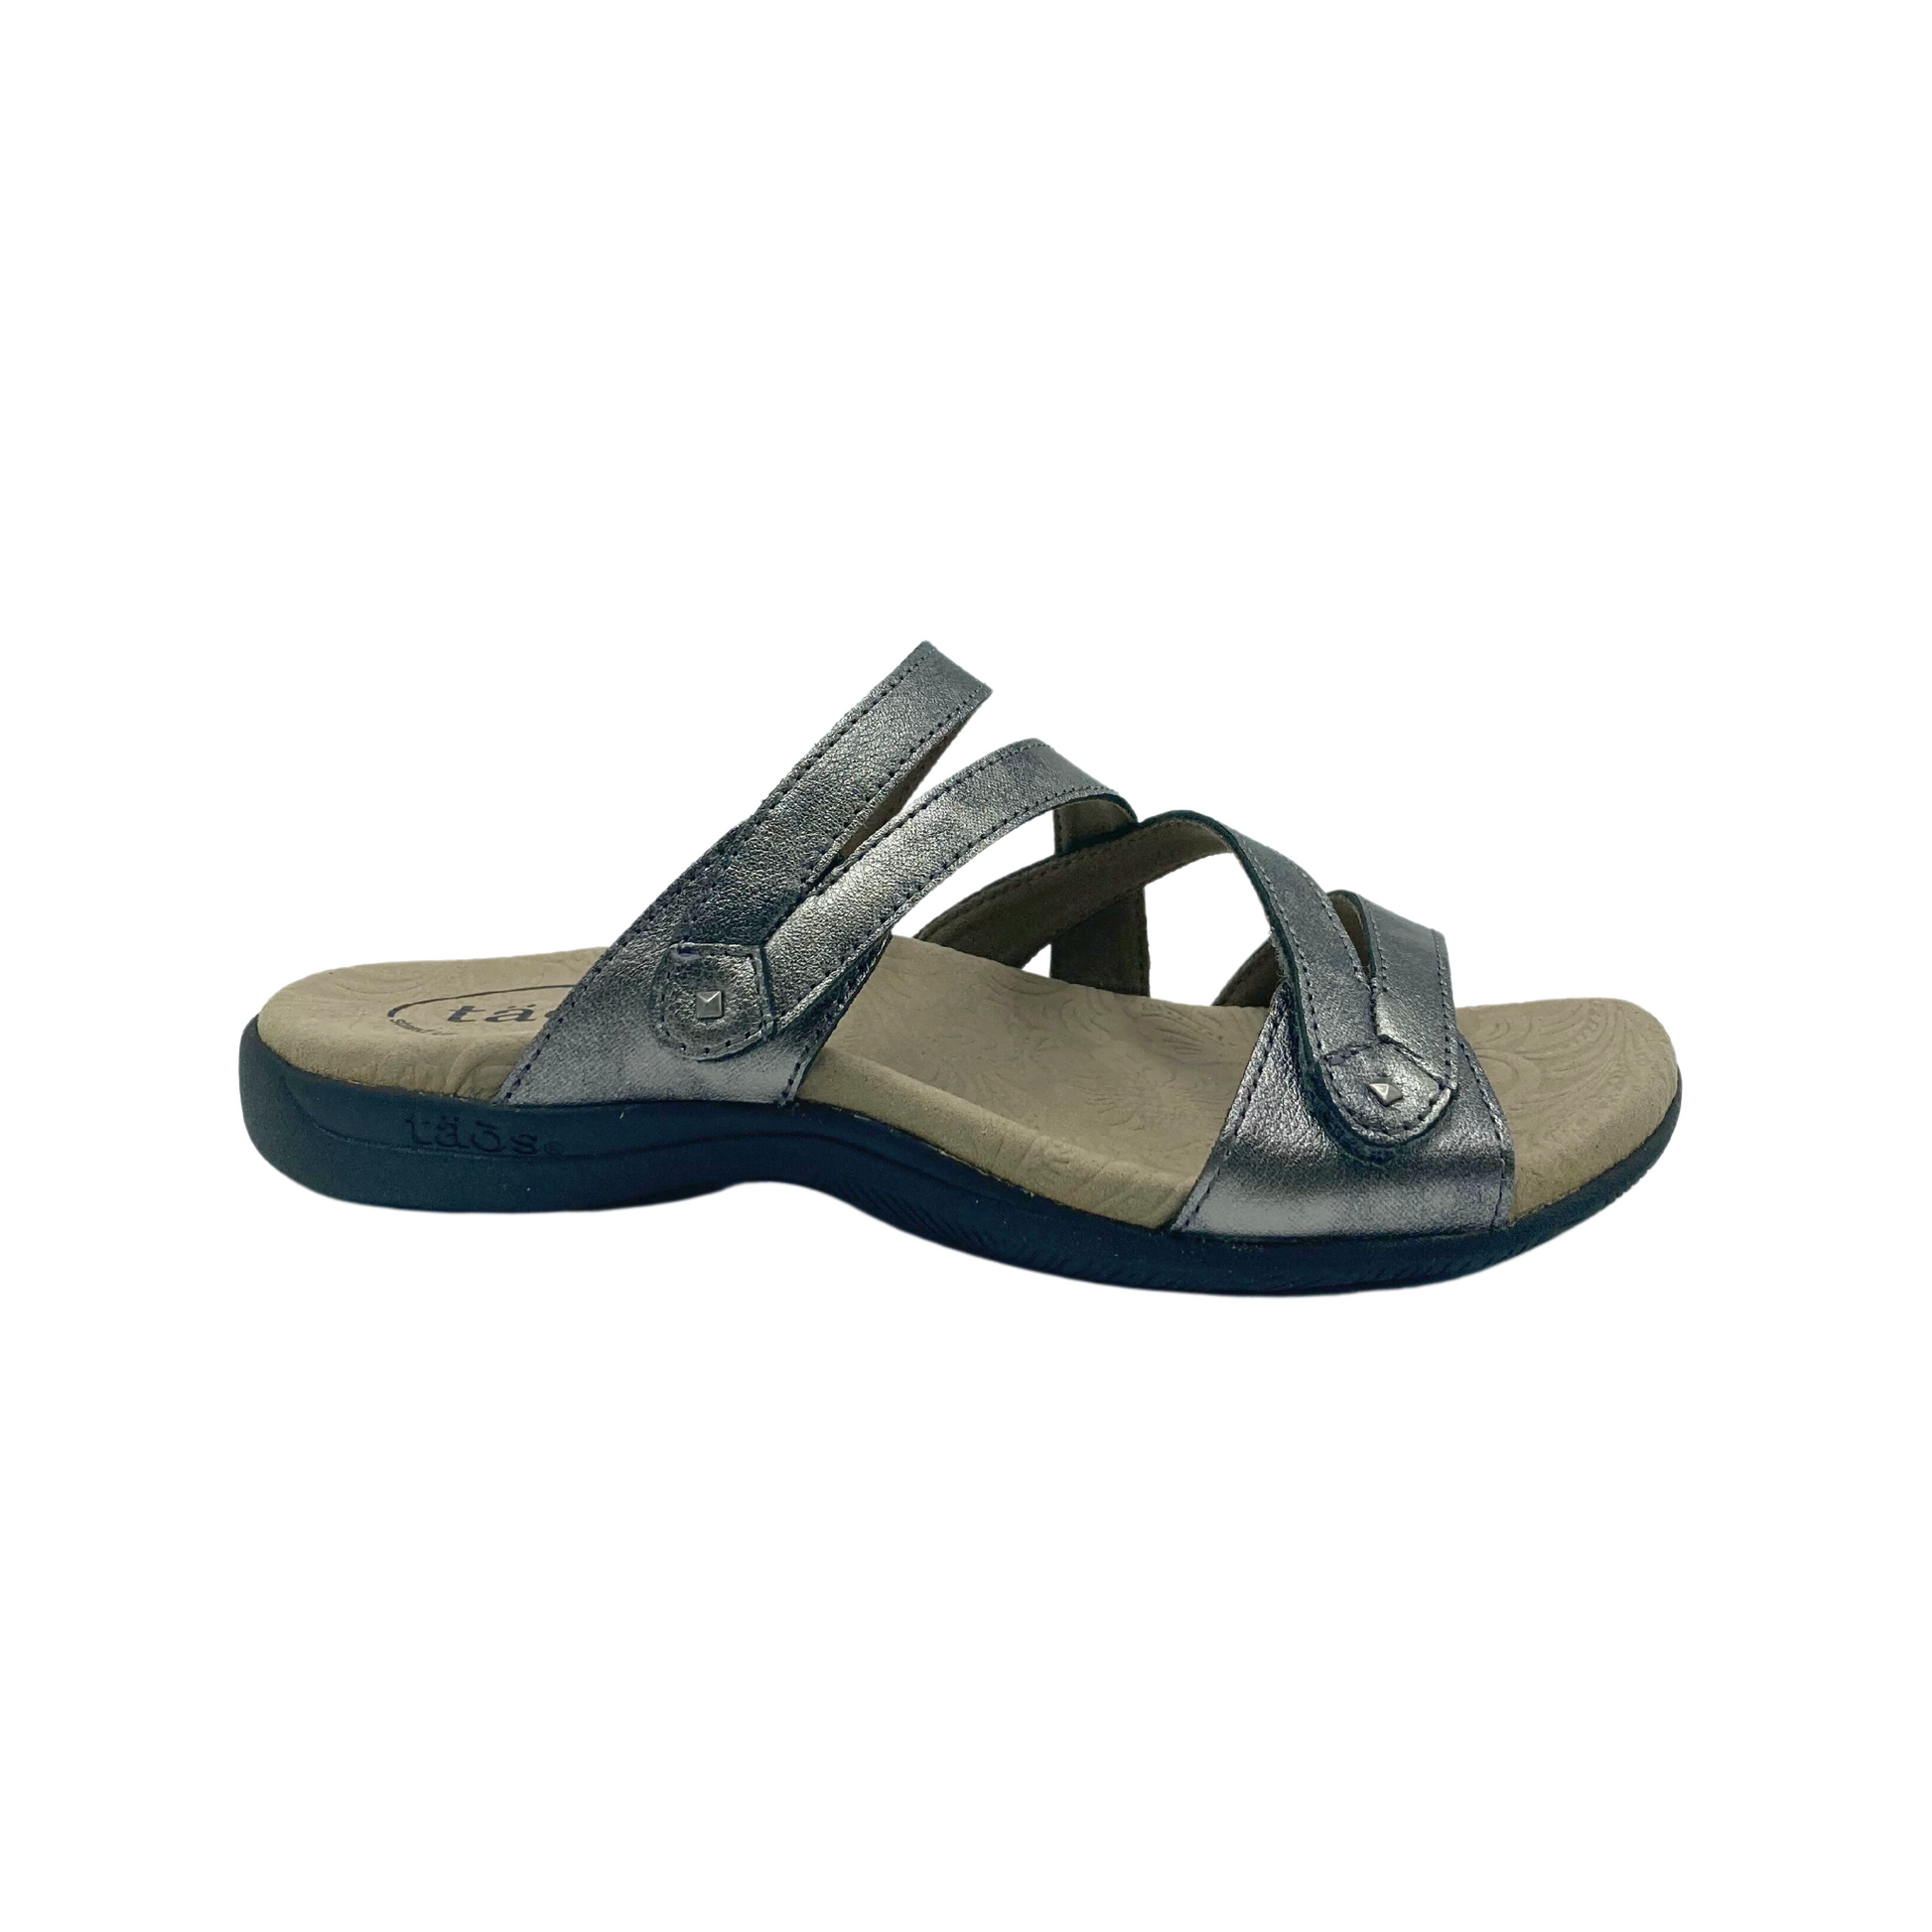 Outside angle view of right sandal in Taos Double U style Pewter.  Features open back and 2 adjustable velcro straps for best fit.